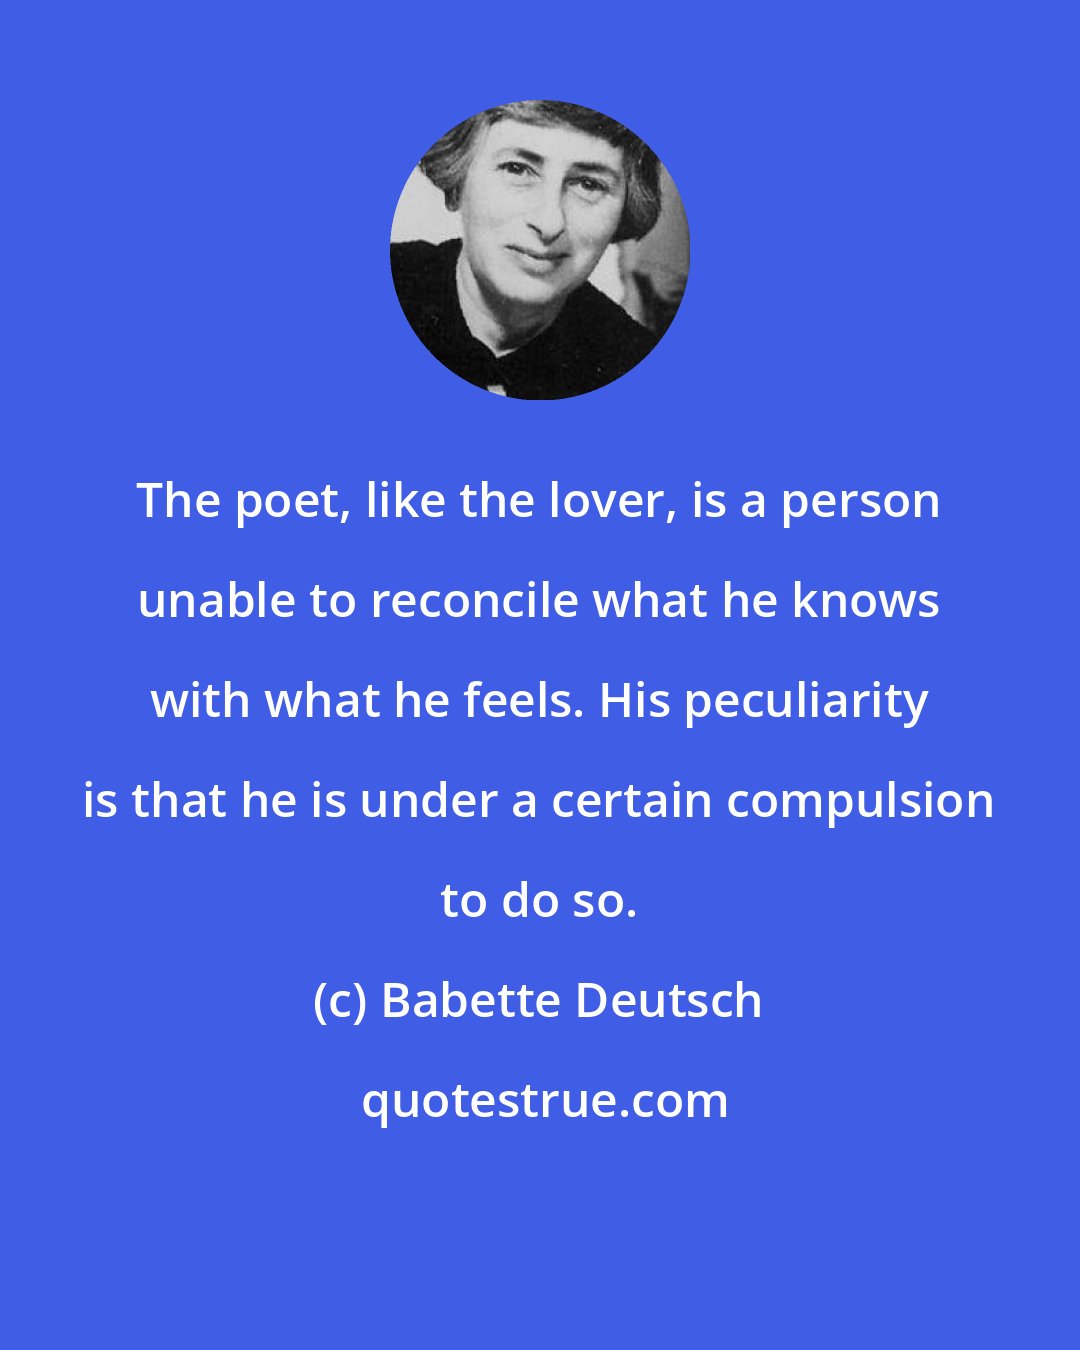 Babette Deutsch: The poet, like the lover, is a person unable to reconcile what he knows with what he feels. His peculiarity is that he is under a certain compulsion to do so.